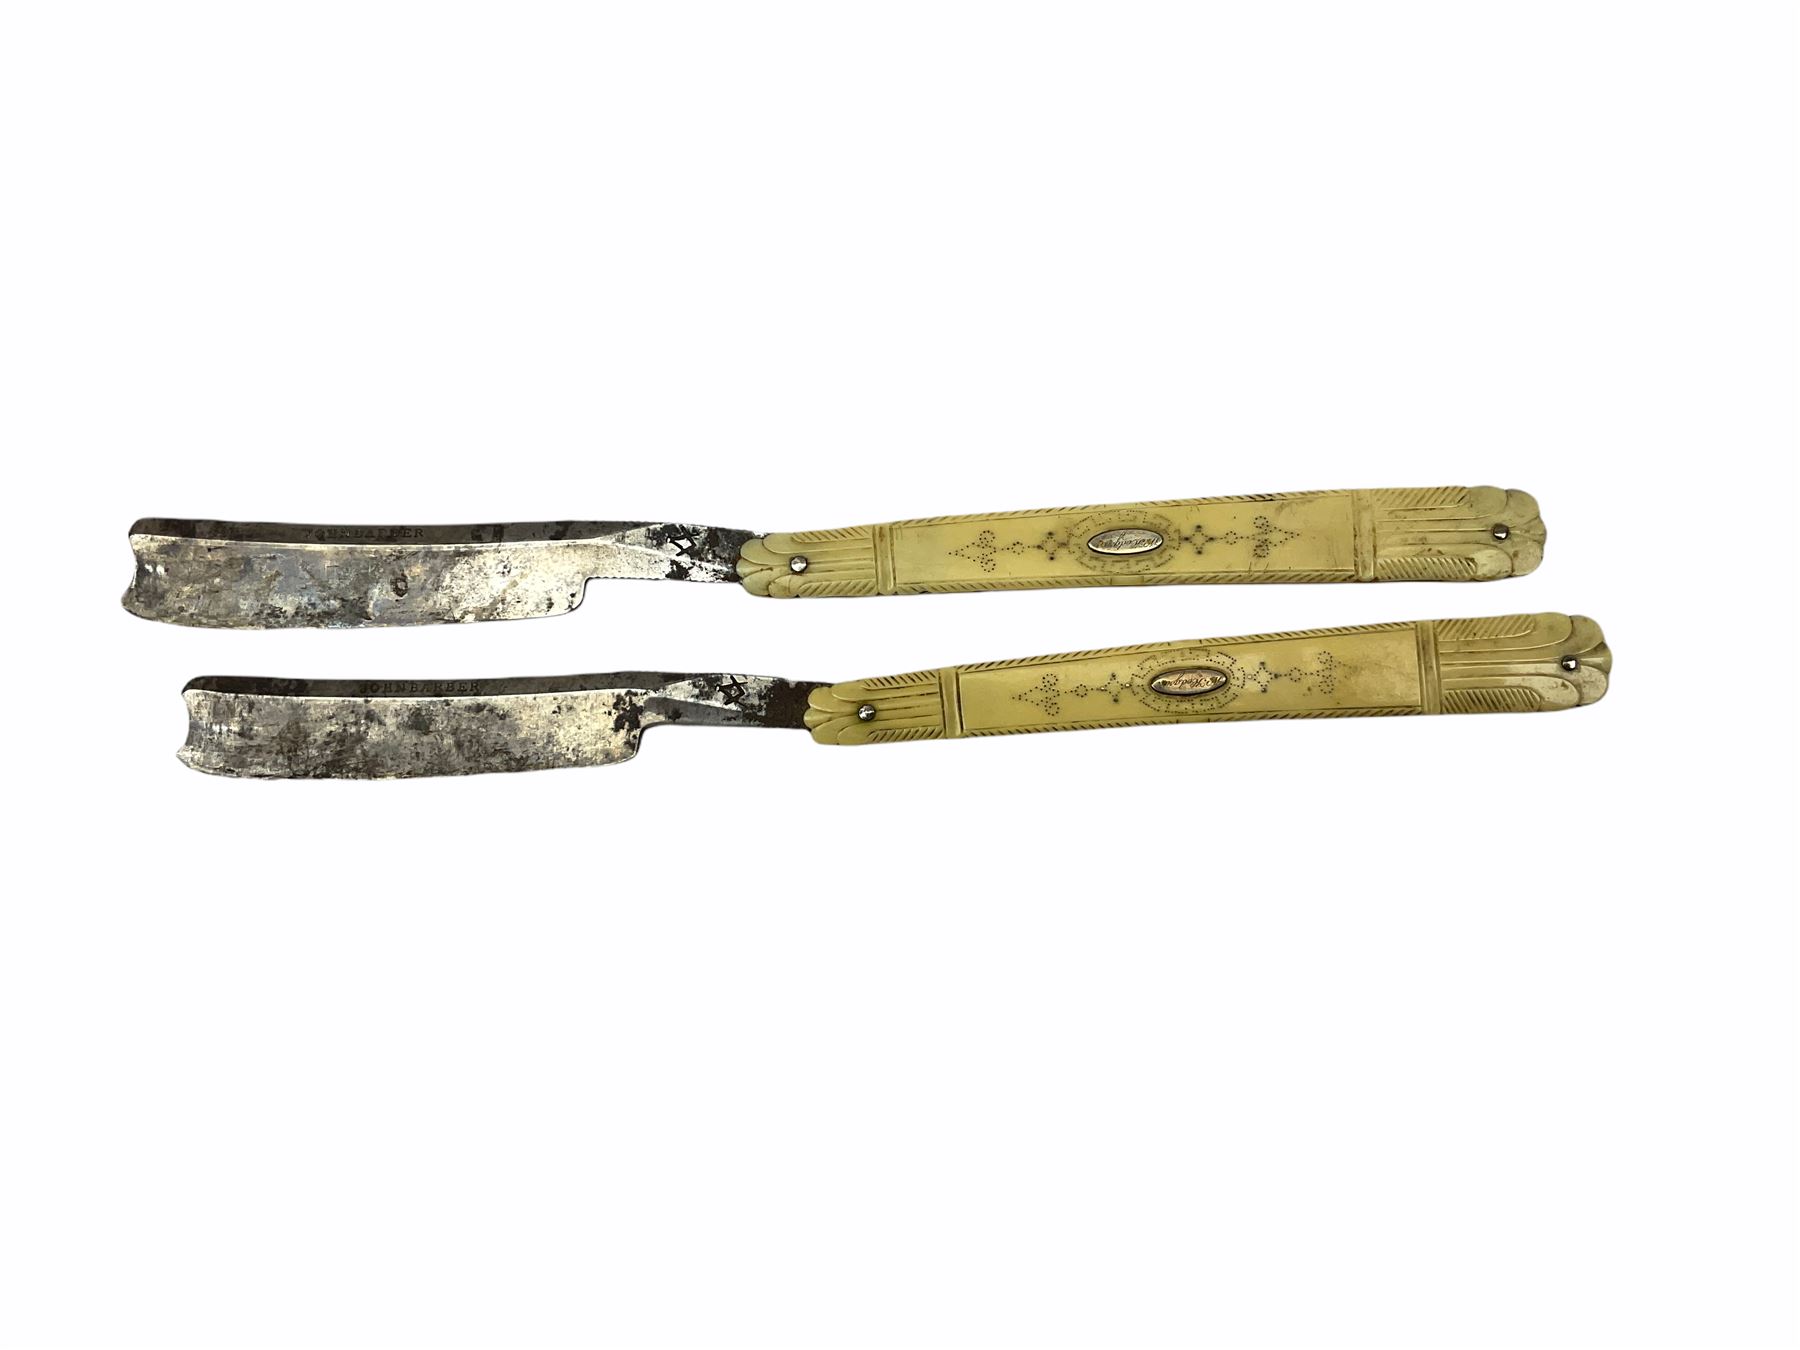 Pair of early 19th century John Barber ivory cut-throat razors with pique work decoration - Image 6 of 10